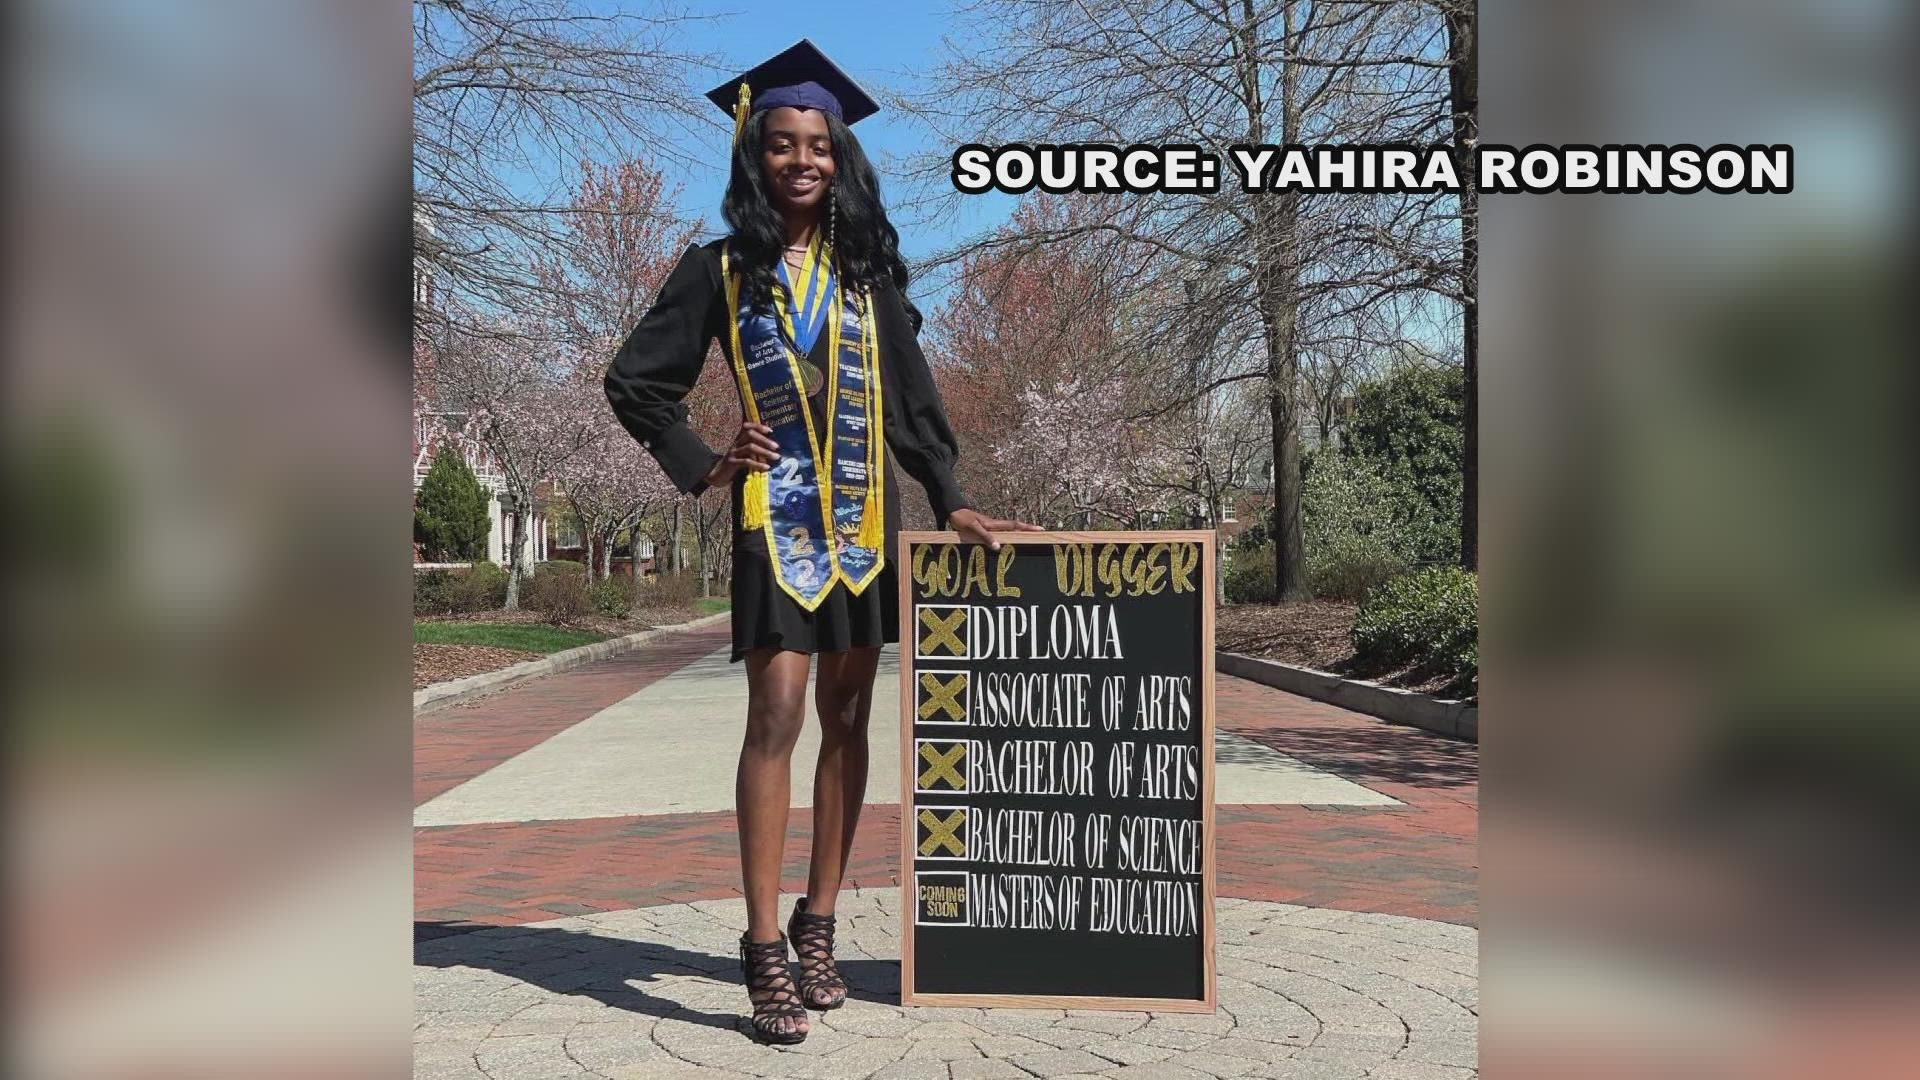 Yahira Robinson double majored in Elementary Education and Dance Studies and even held down a full-time job as a teacher in her last semester at UNC-Greensboro.